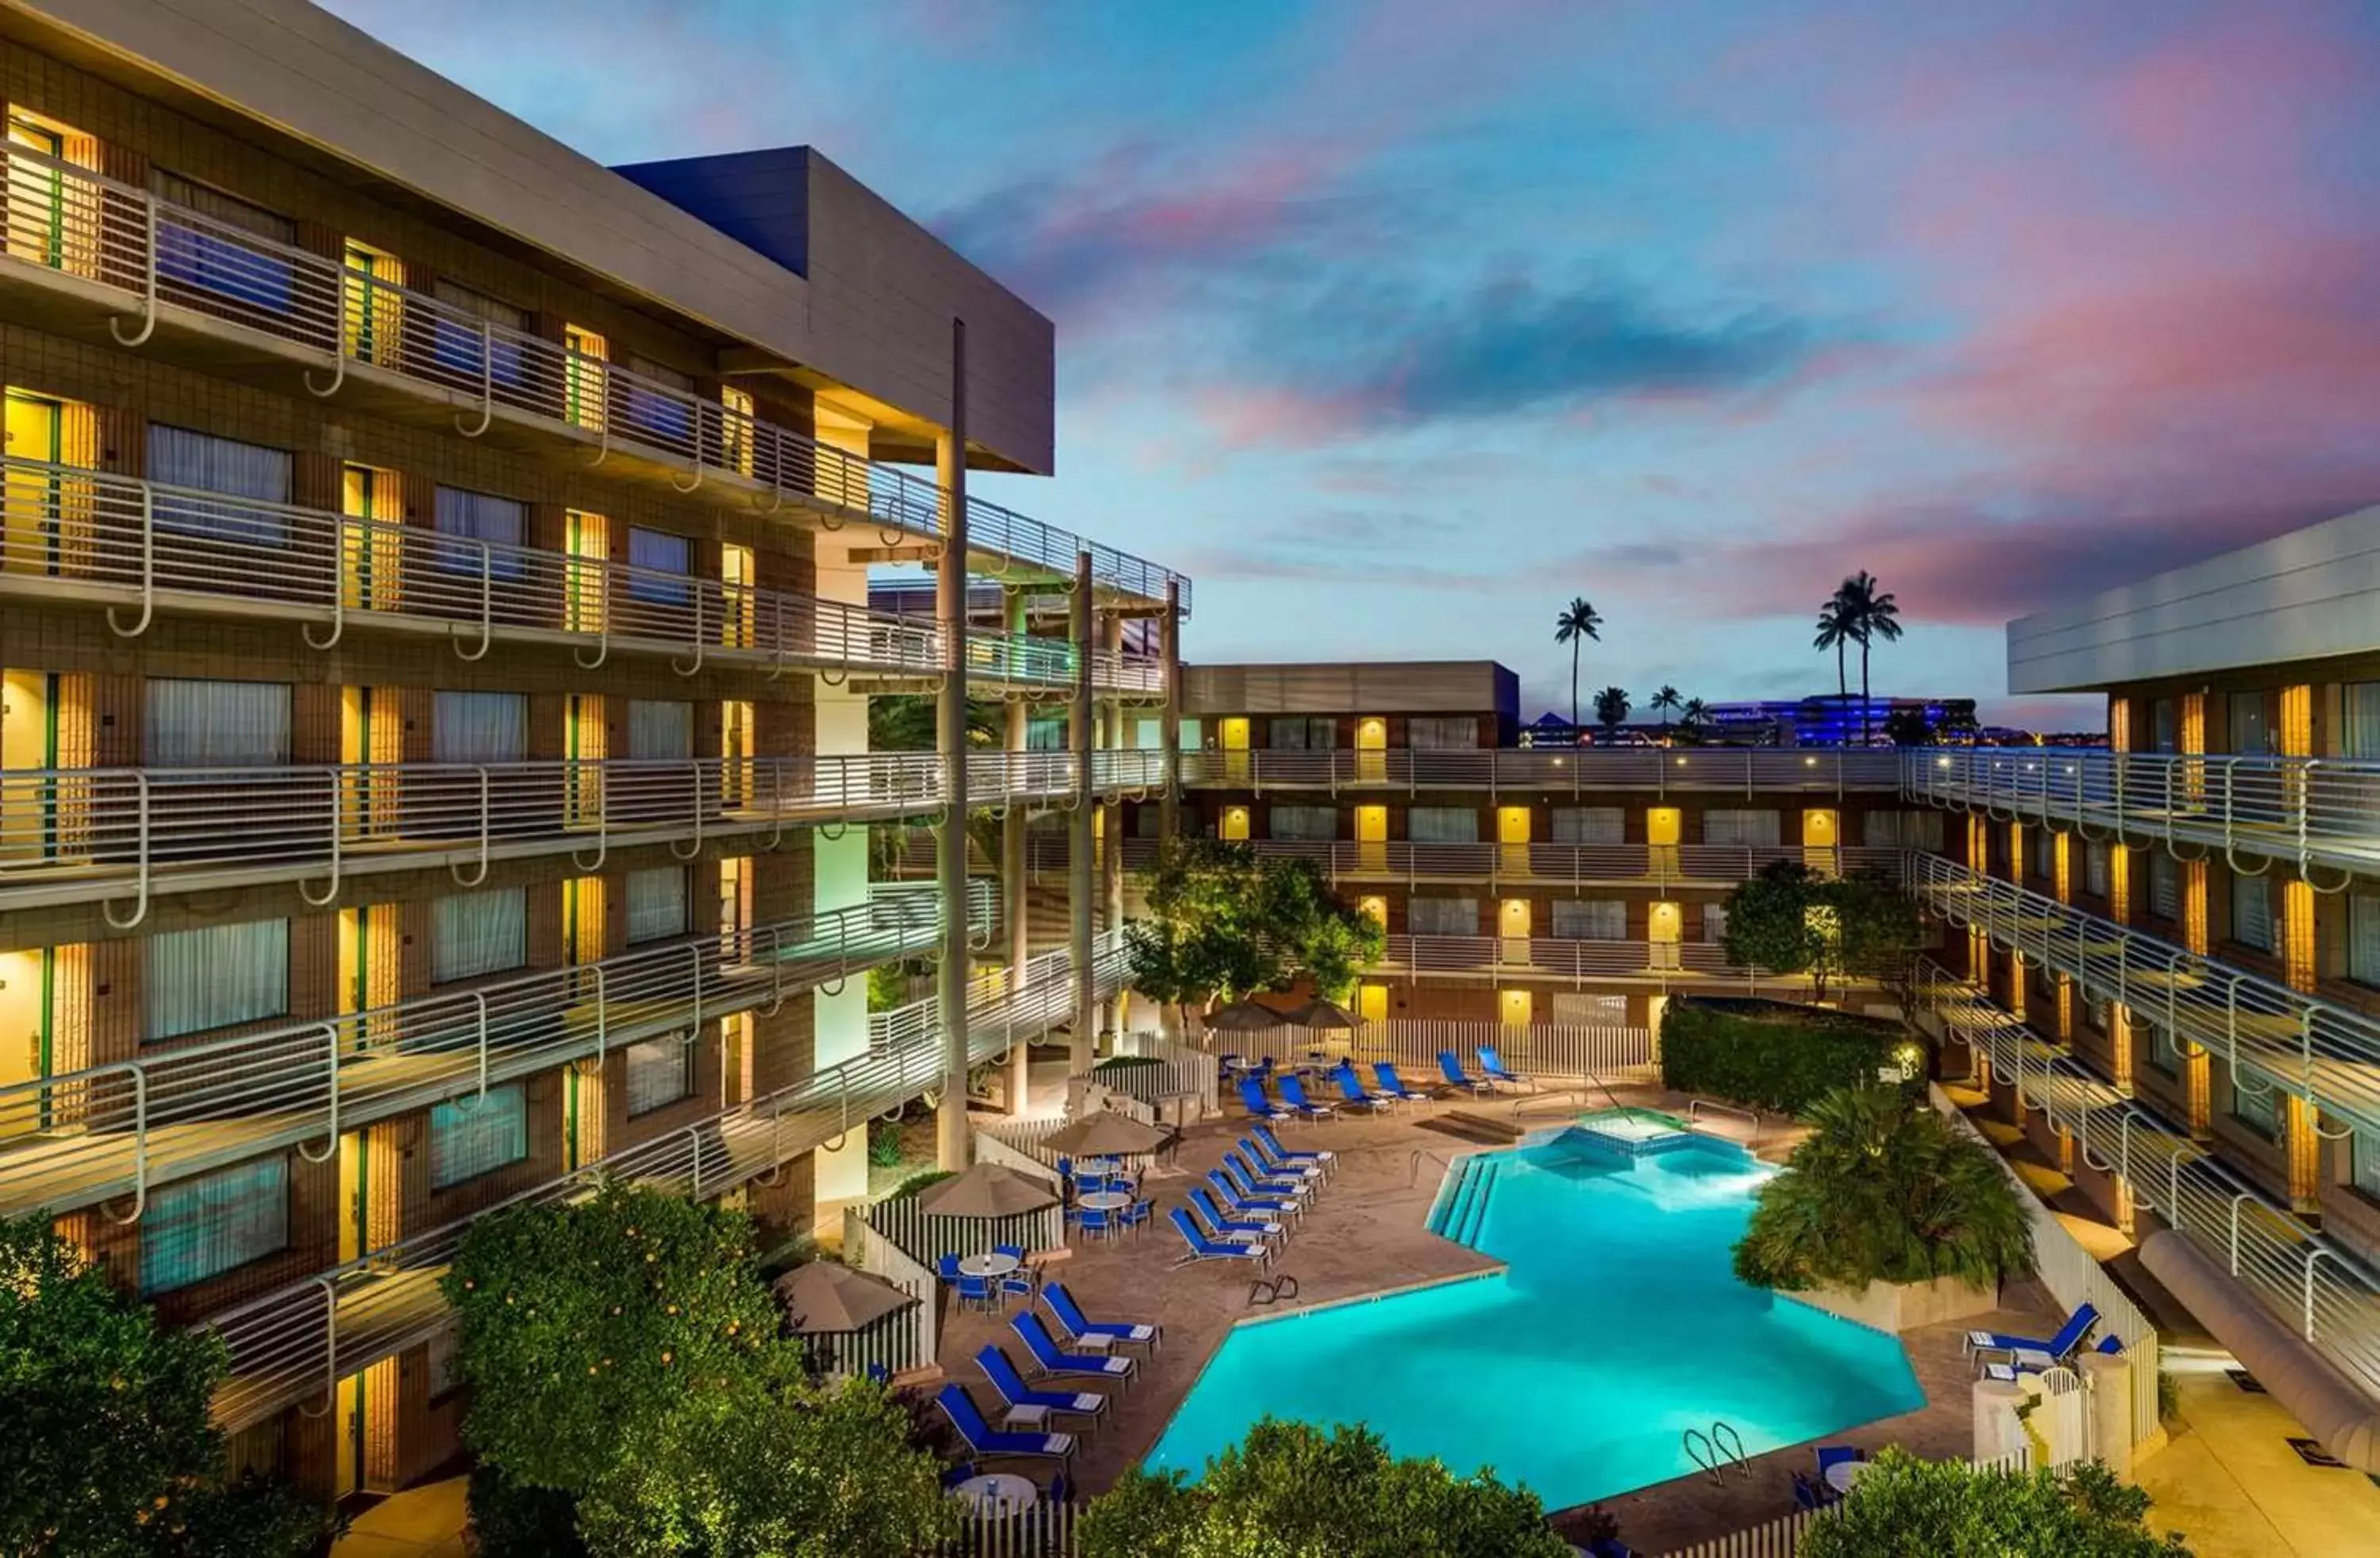 Property building, Pool View in DoubleTree Suites by Hilton Phoenix